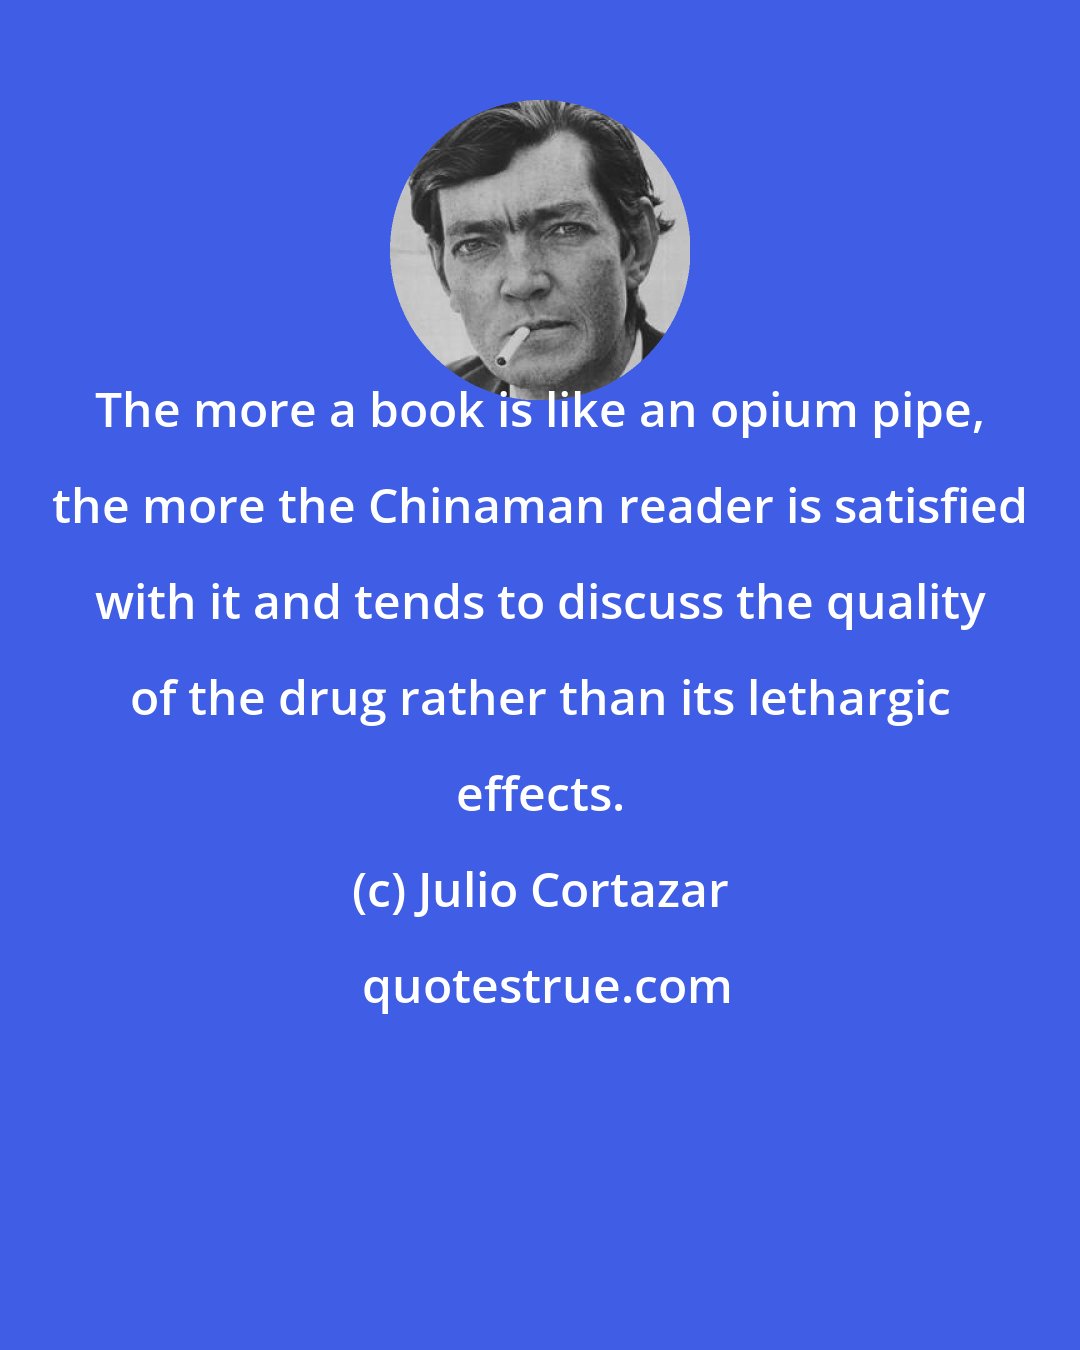 Julio Cortazar: The more a book is like an opium pipe, the more the Chinaman reader is satisfied with it and tends to discuss the quality of the drug rather than its lethargic effects.